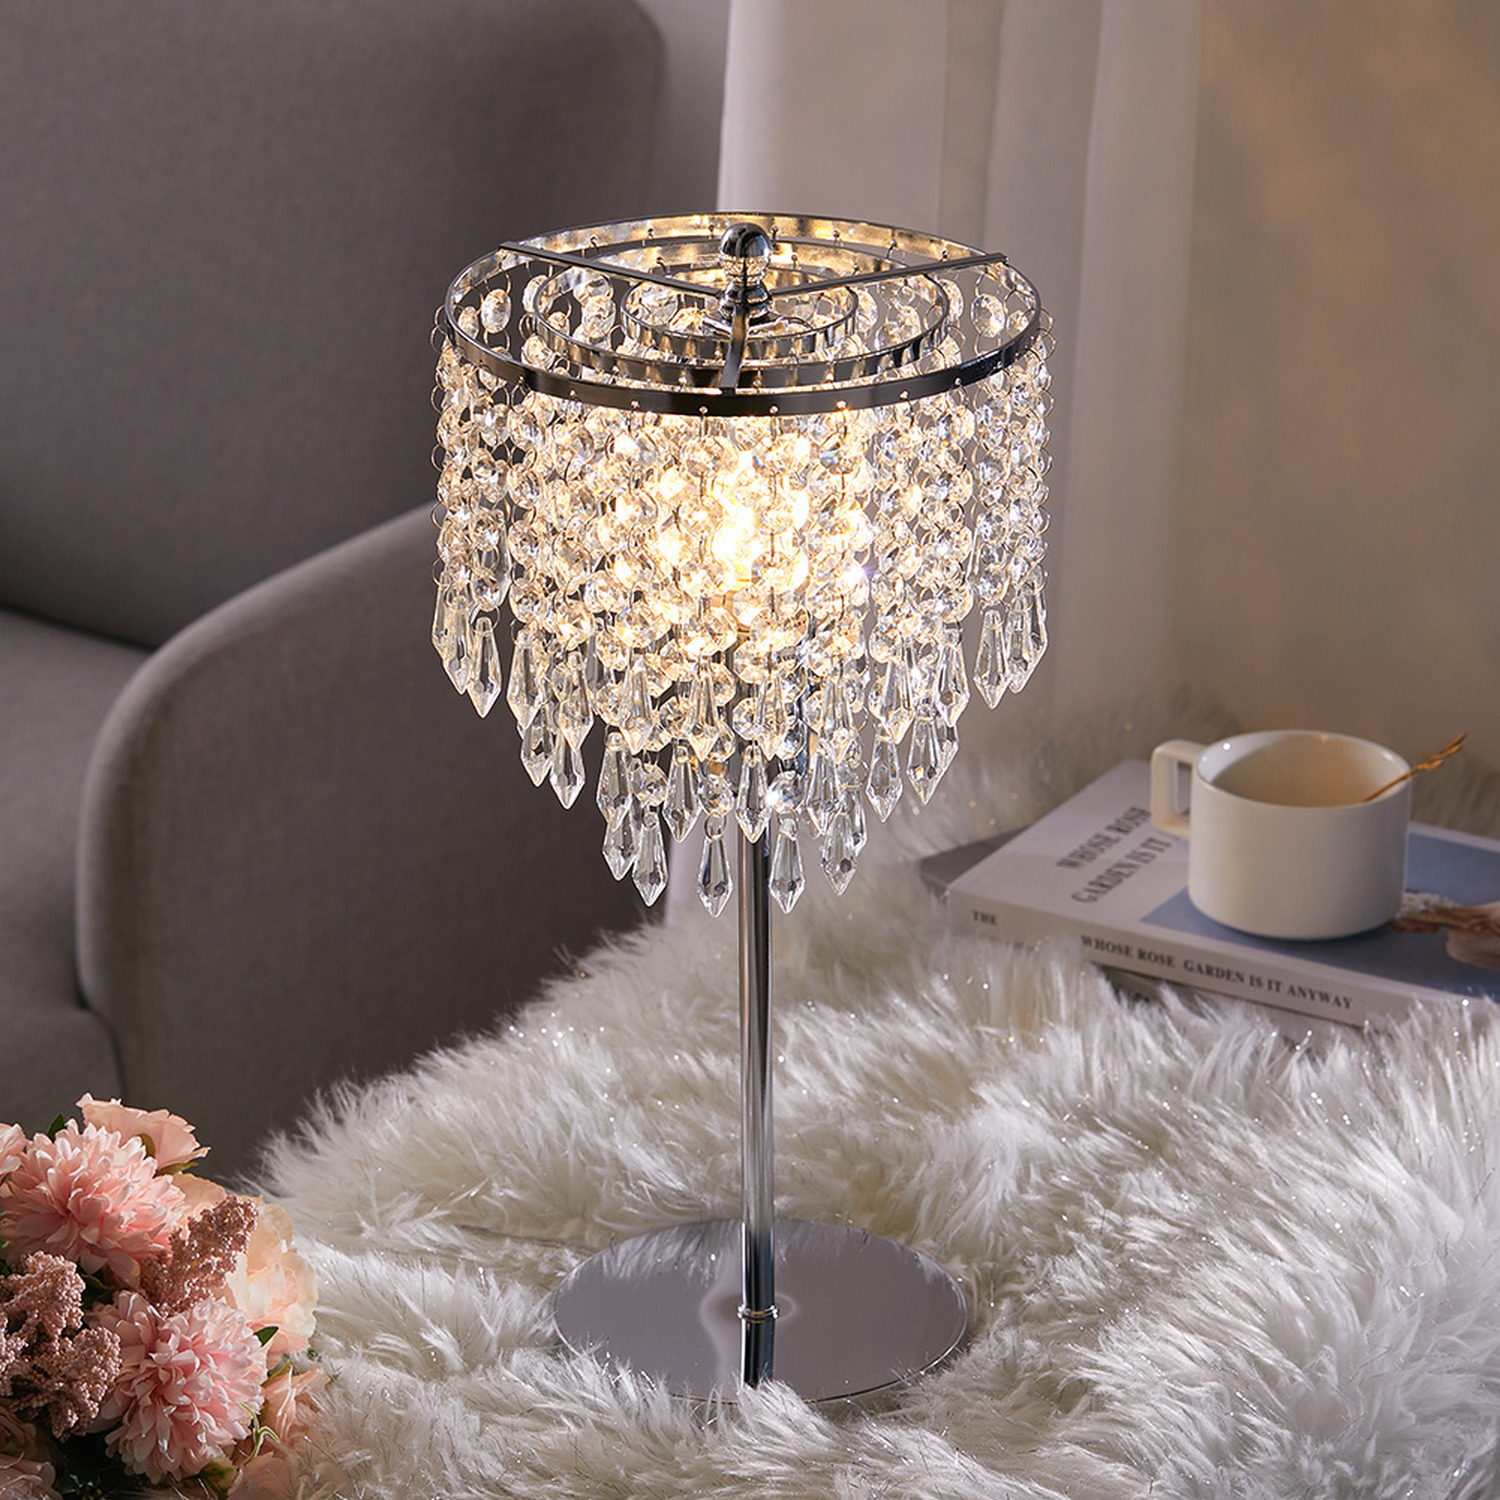 Illuminating Your Space: 10 Creative Ways to Use a Table Lamp